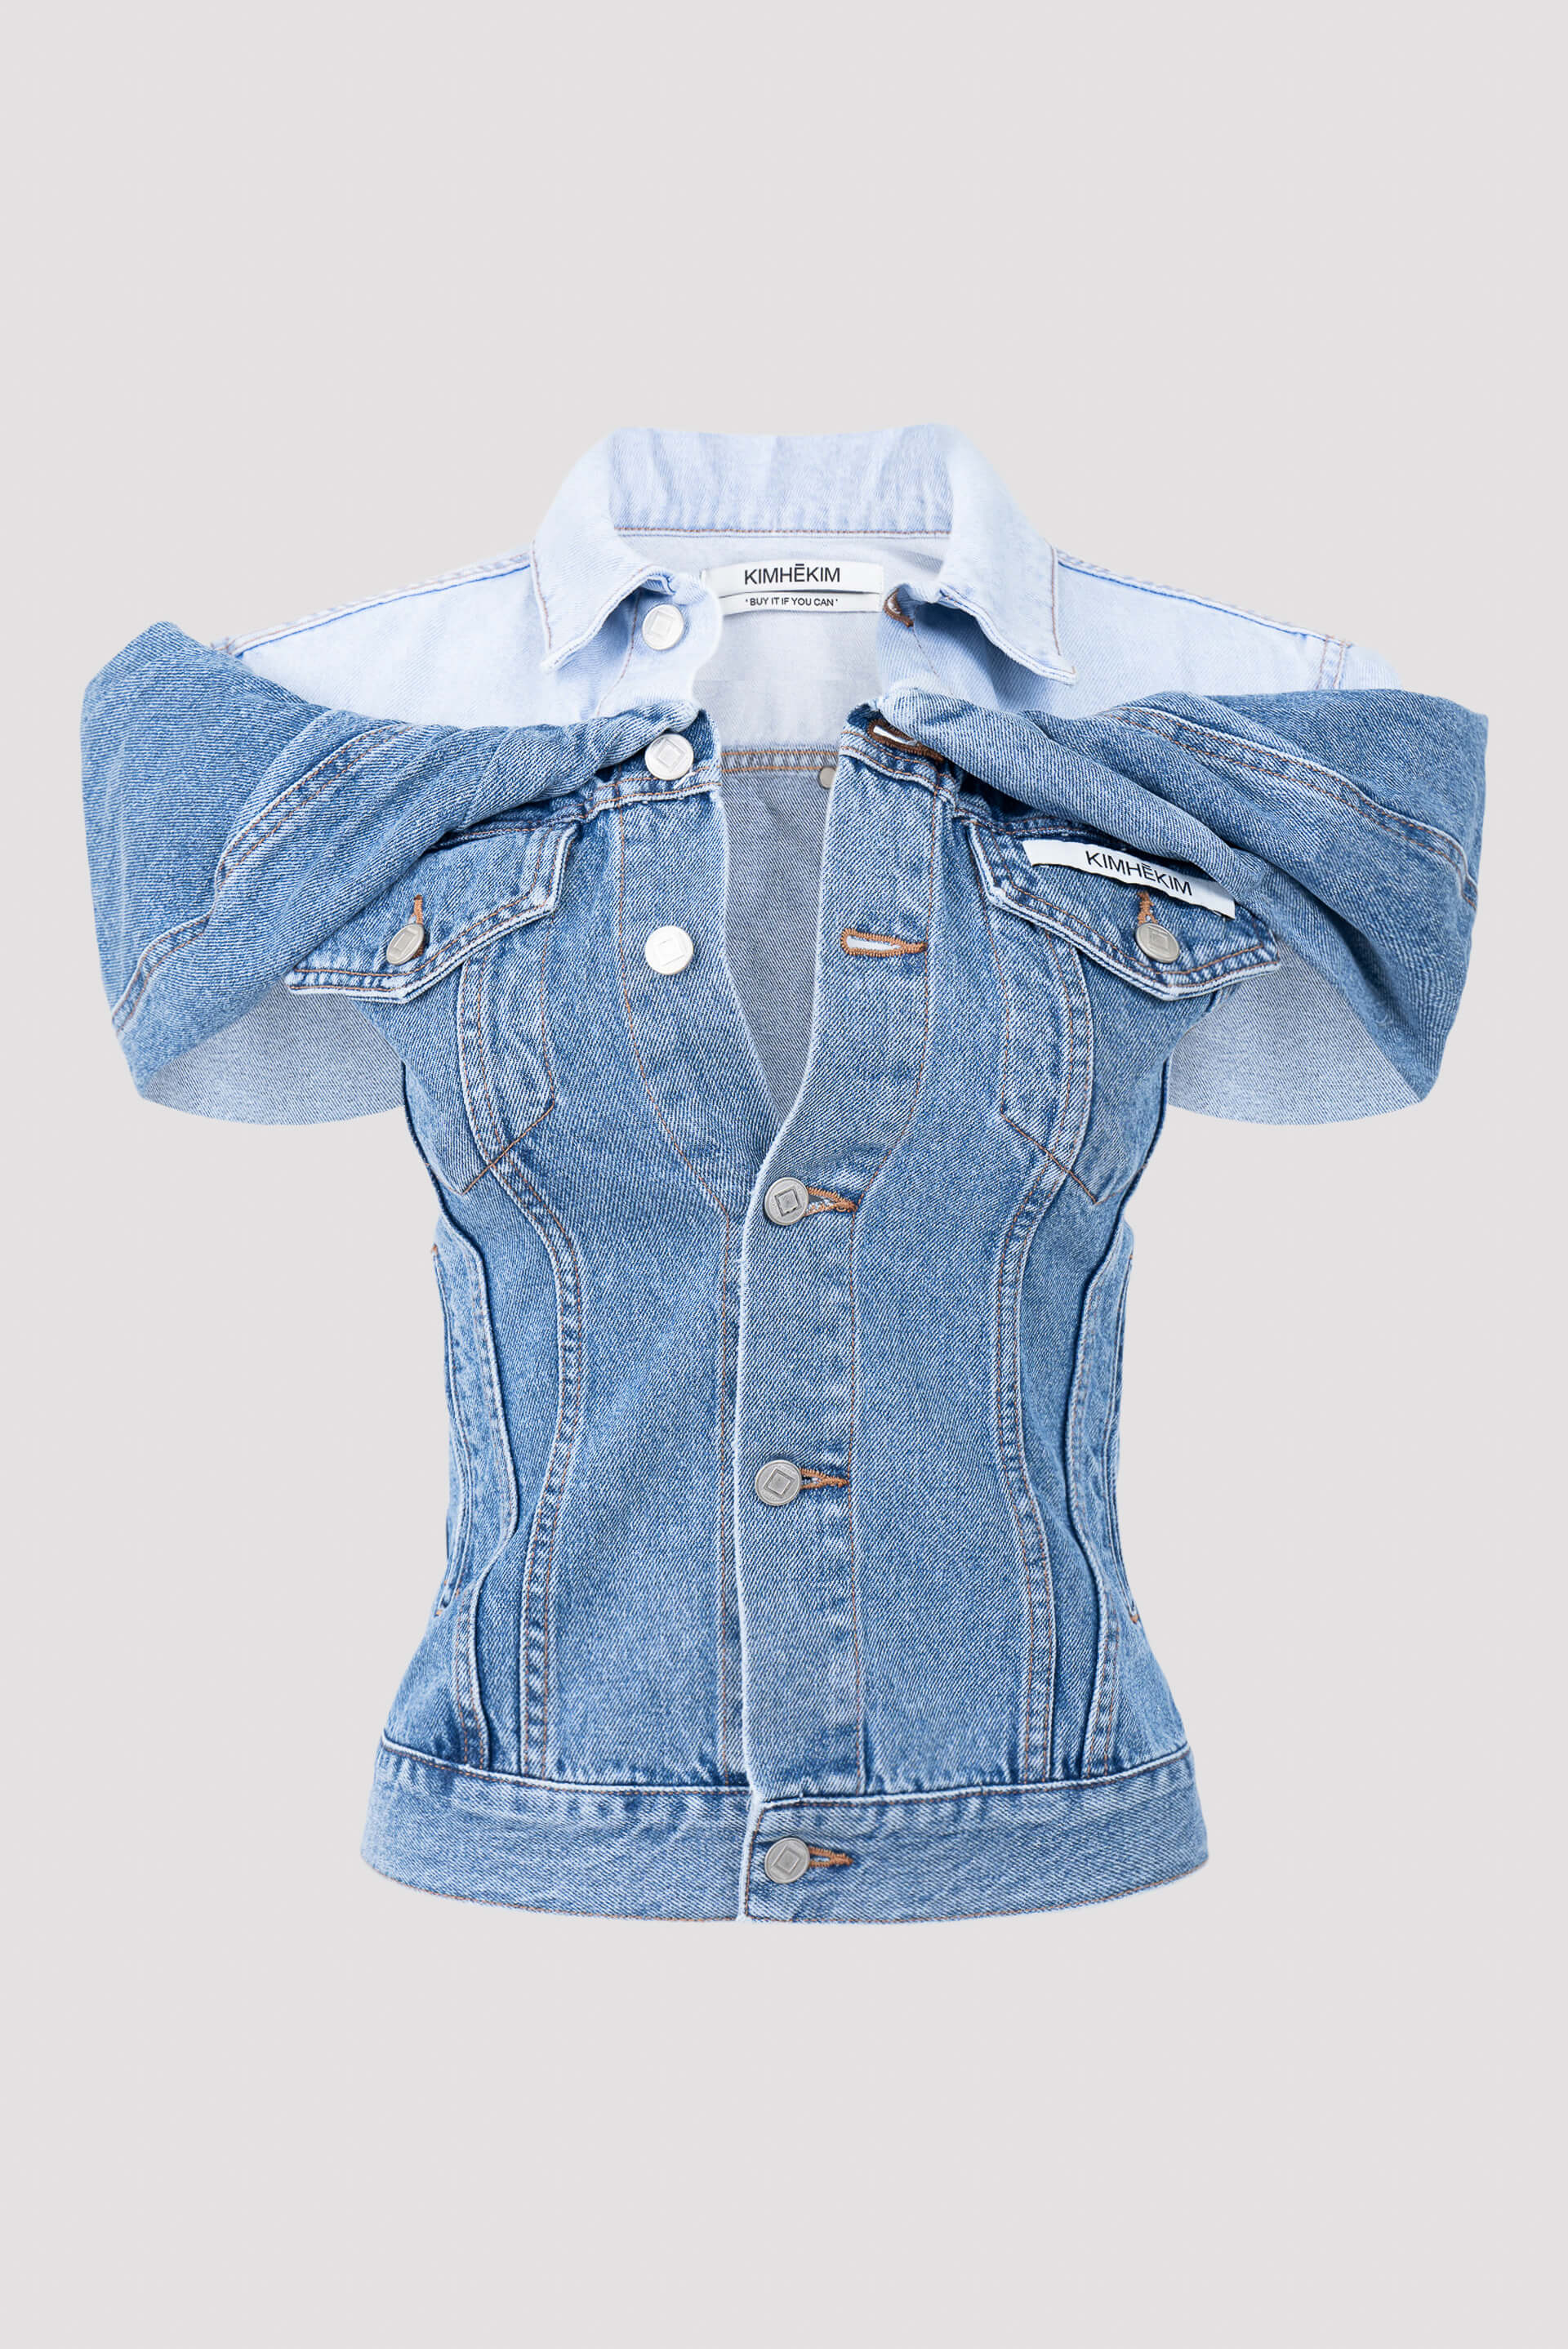 Cupped Shaping Denim Corset